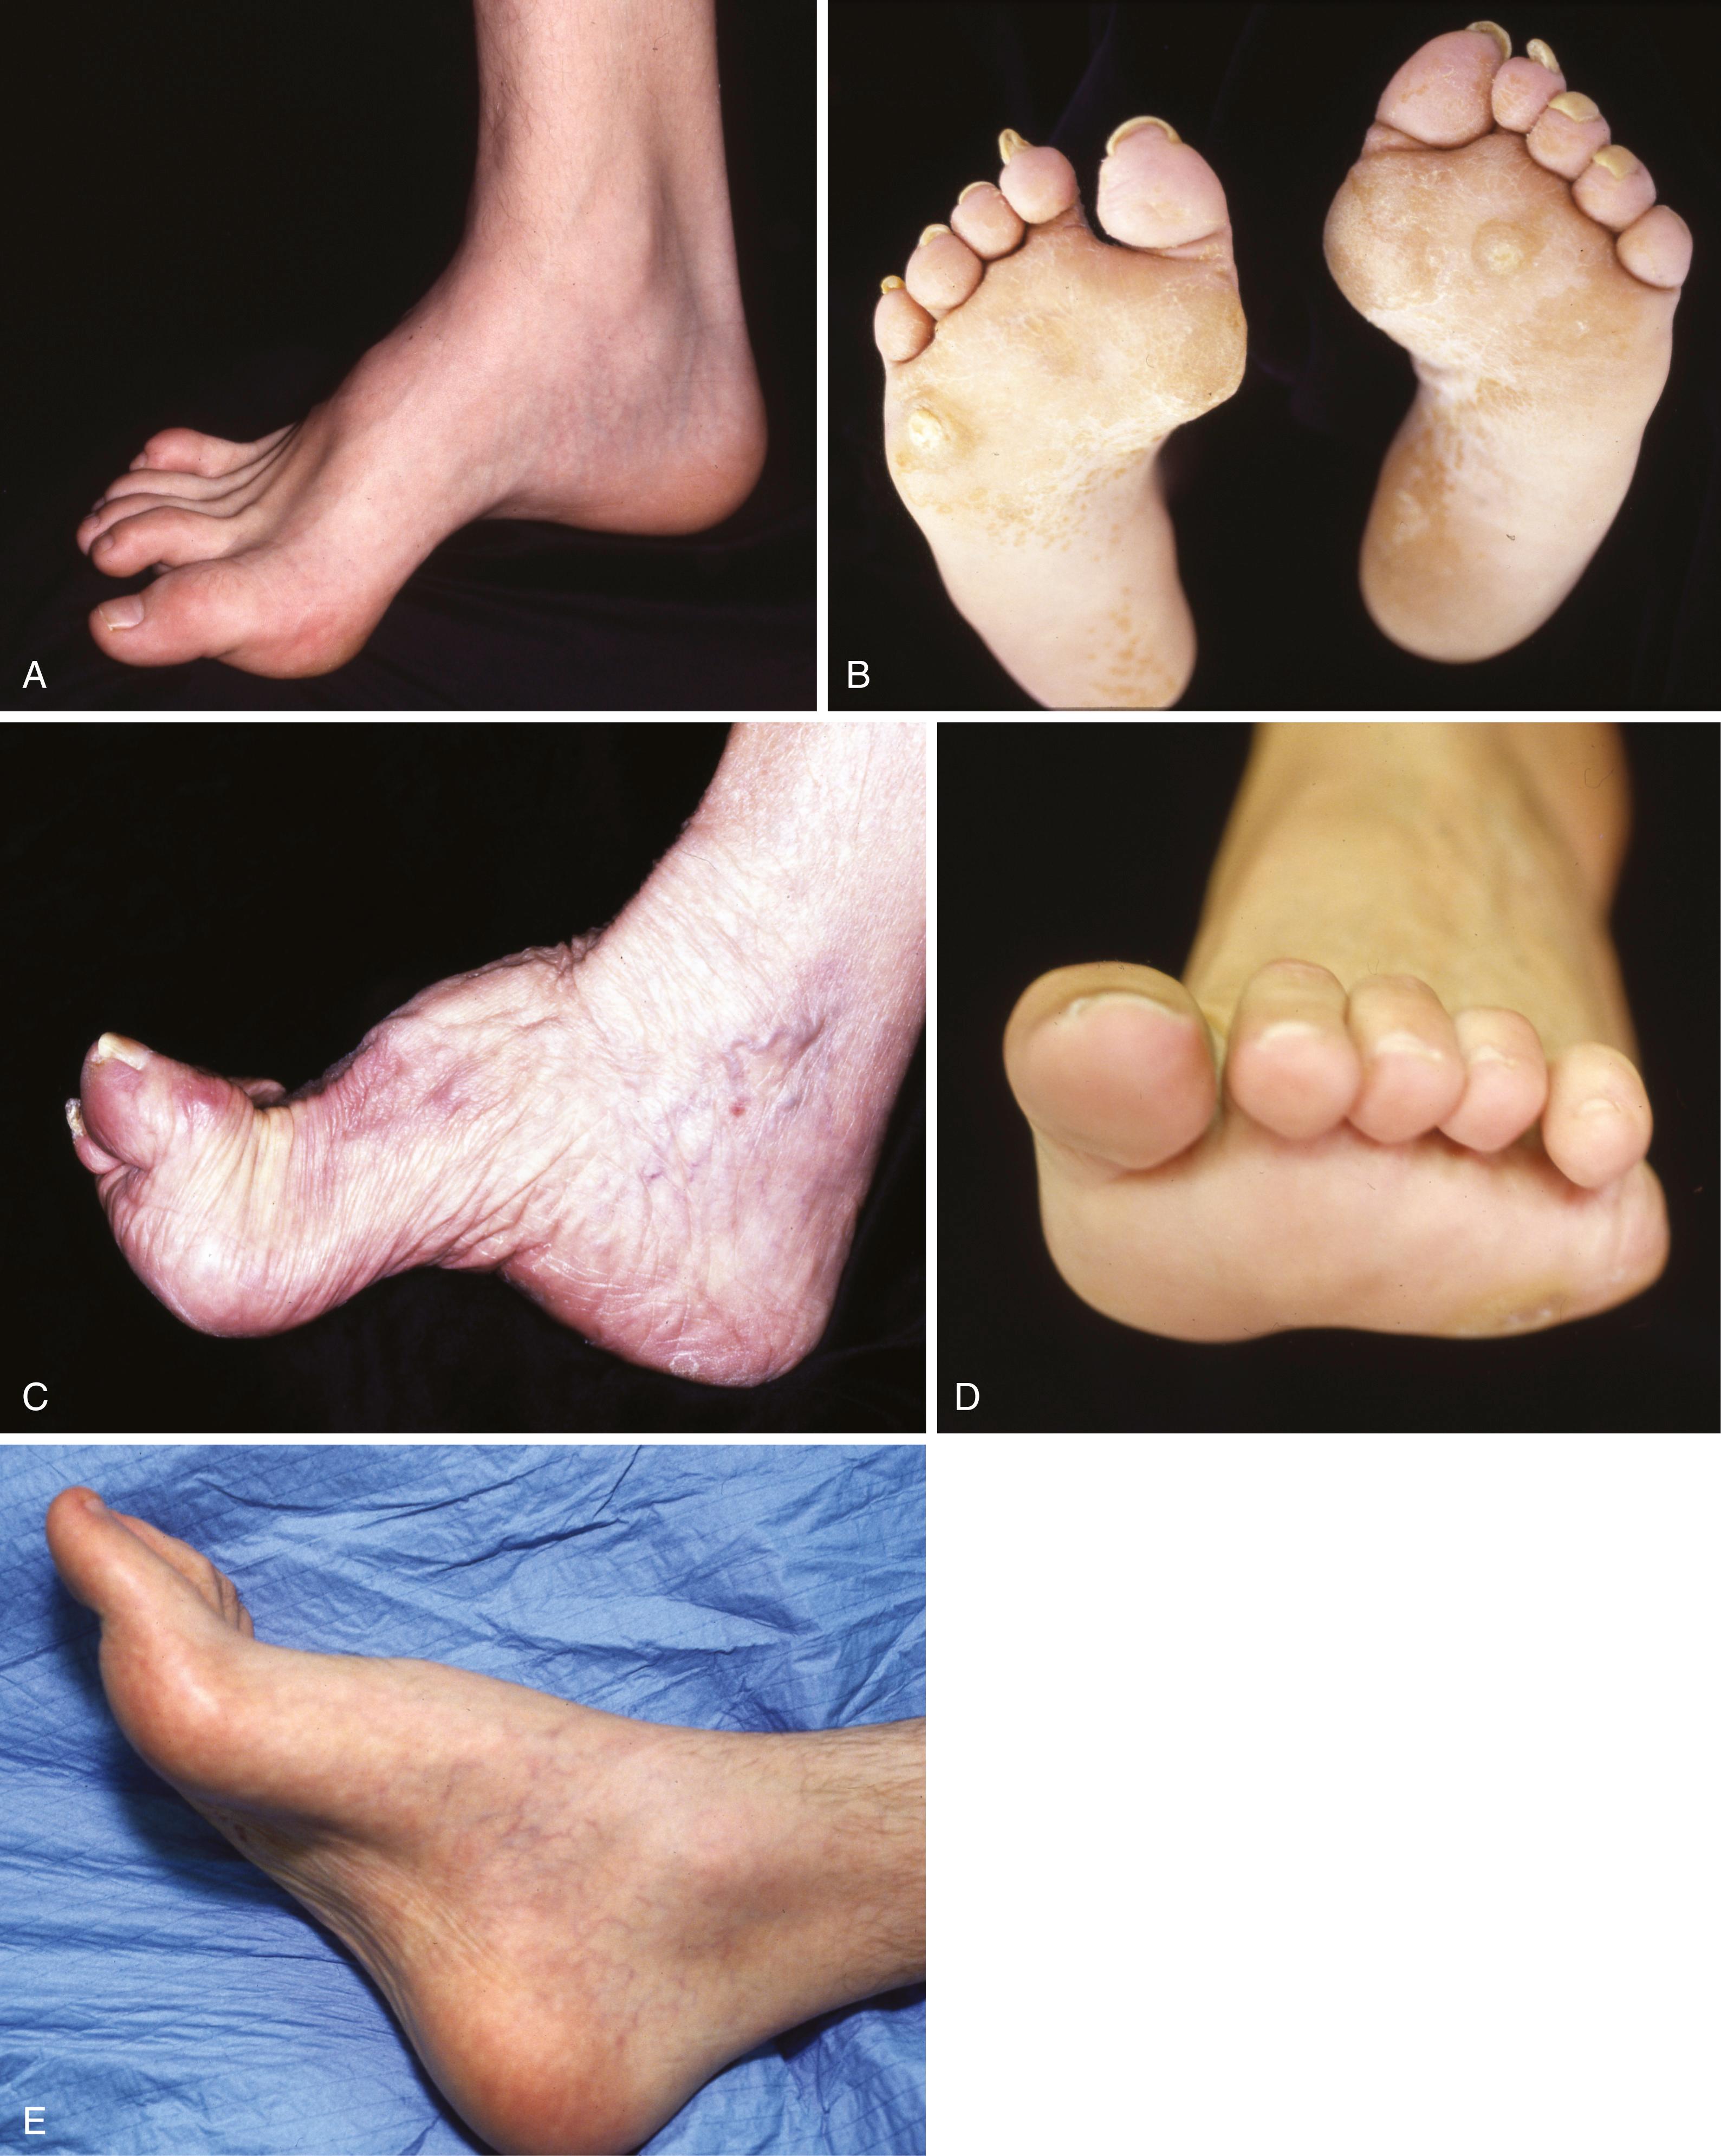 FIGURE 87.13, A, Mild cavus deformity and clawing of toes in patient in whom no cause could be found. B, Calluses beneath metatarsal heads are most common symptom prompting orthopaedic consultation. C, Marked forefoot equinus and resulting dorsal prominence of tarsus in patient with residual poliomyelitis deformity. D, Forefoot is pronated in relation to hindfoot during weight bearing; note clawing of toes. E, Shortening of medial column of foot.